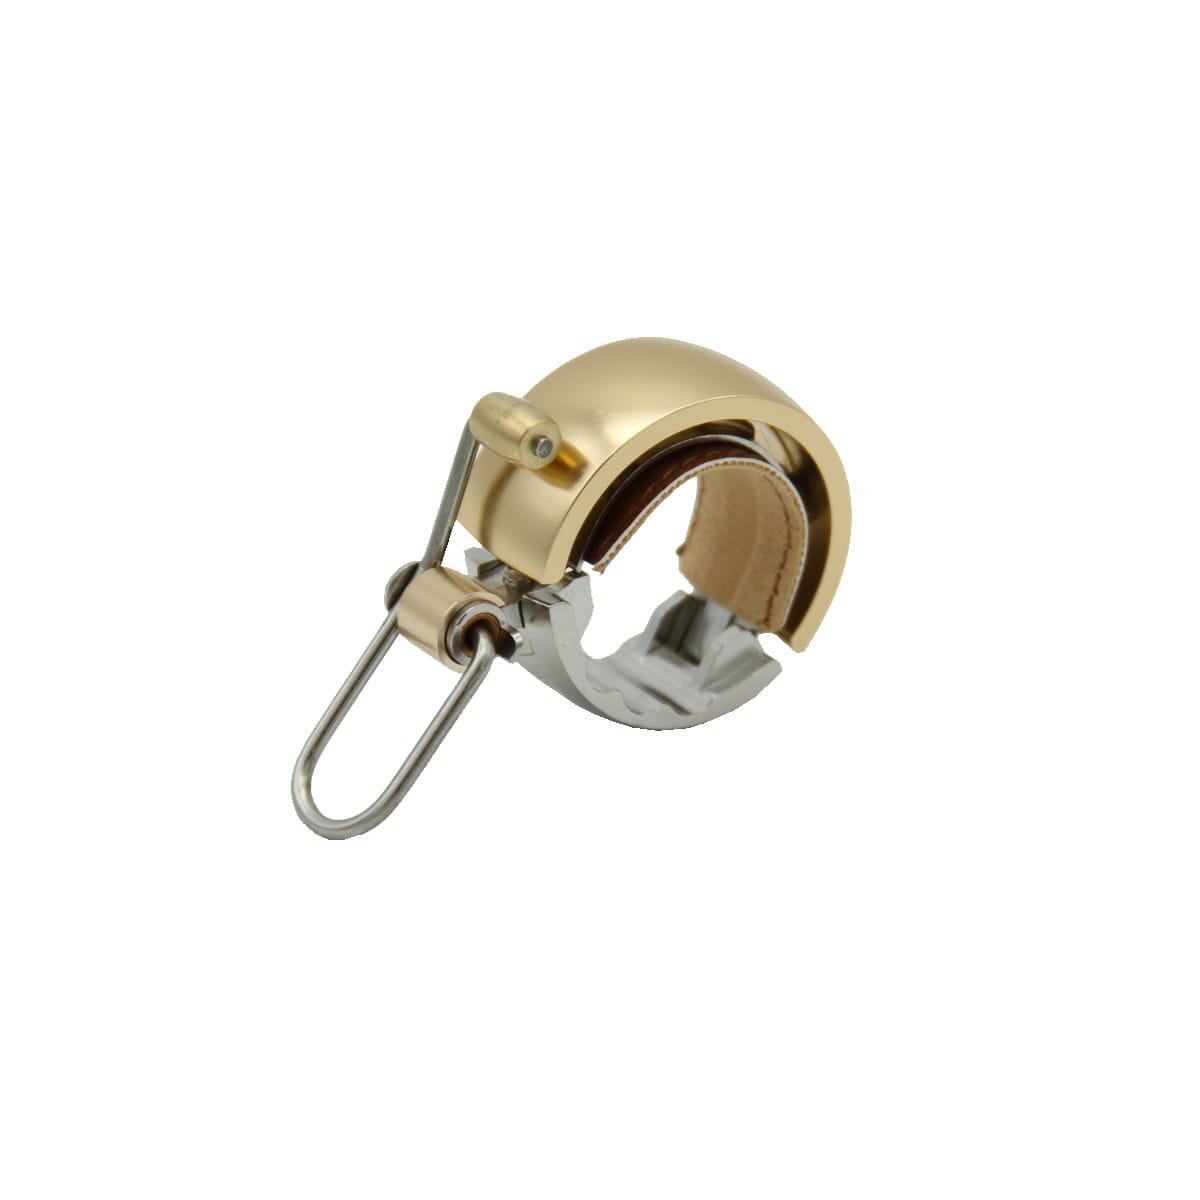 Knog Oi Luxe Bicycle Bell Small Brass 1/7